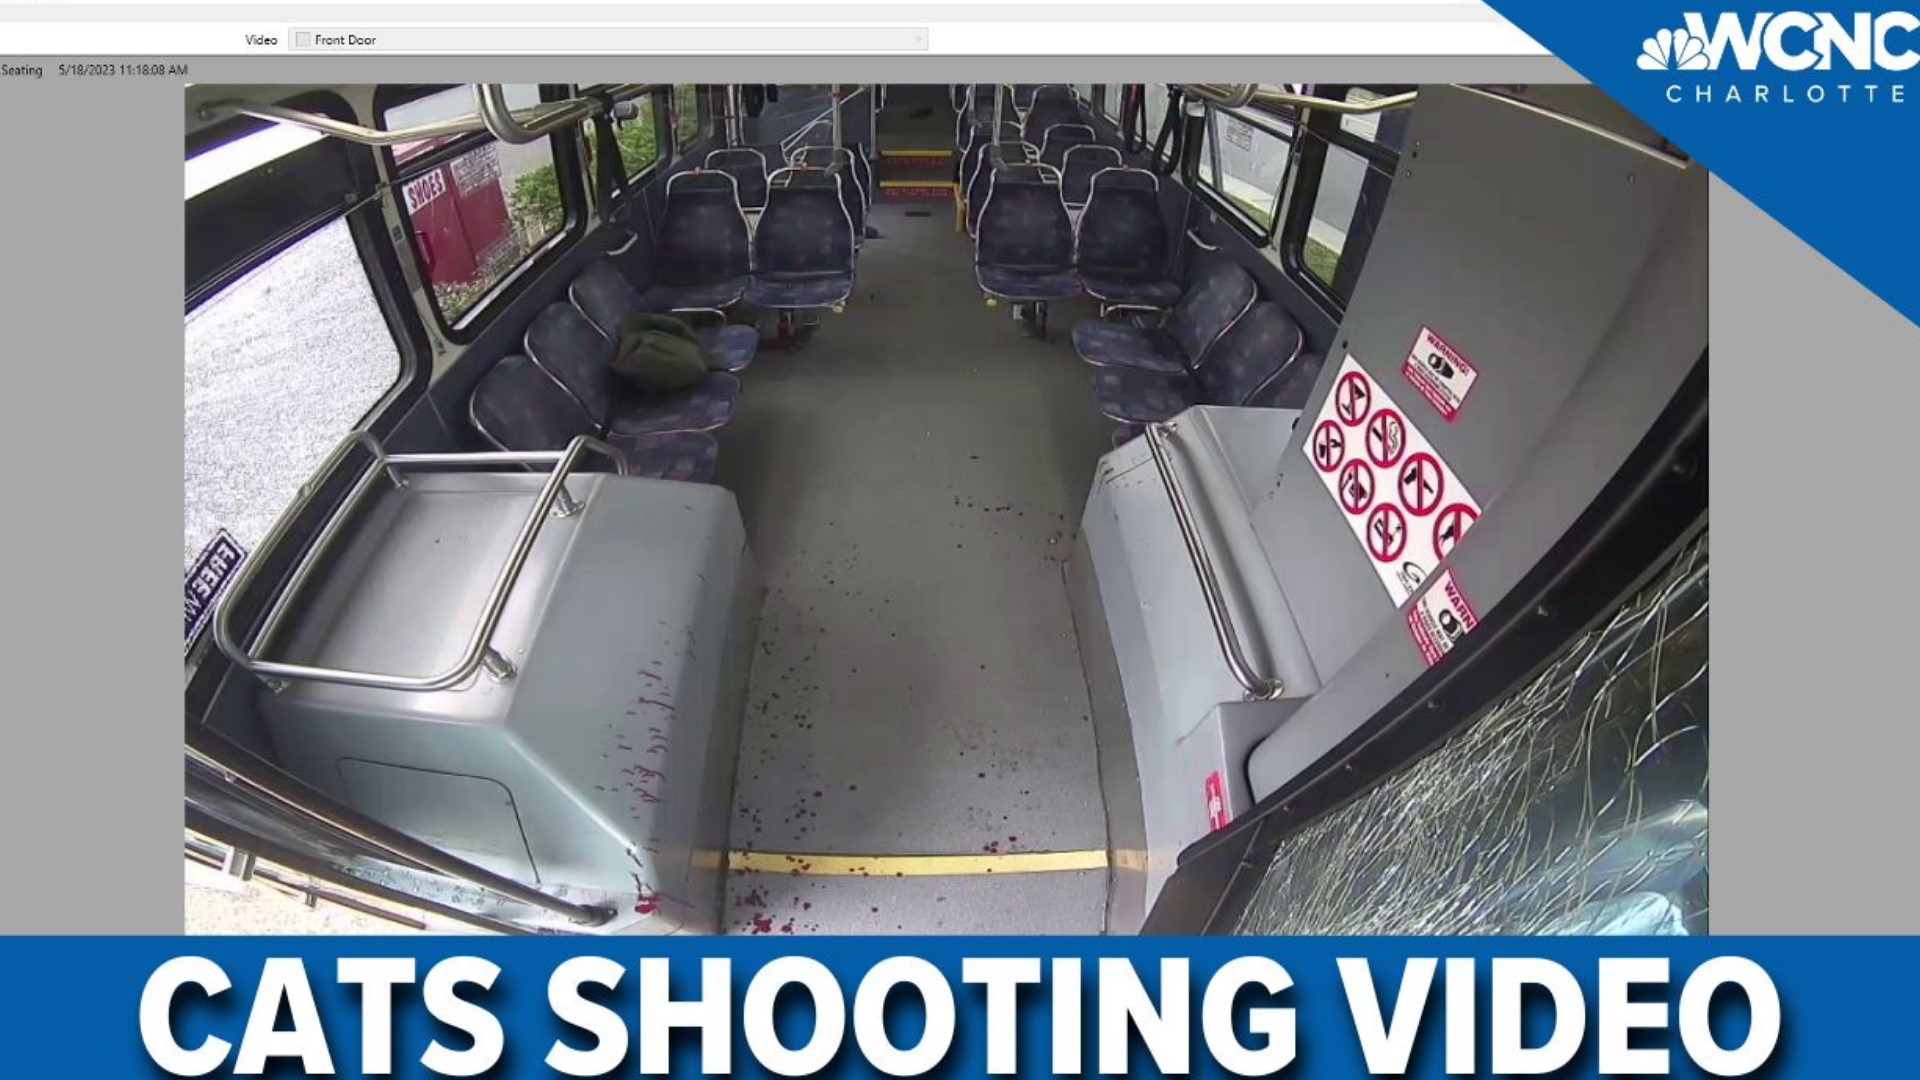 In the video, the passenger can be seen pulling a gun before the driver pulls his own gun moments later.